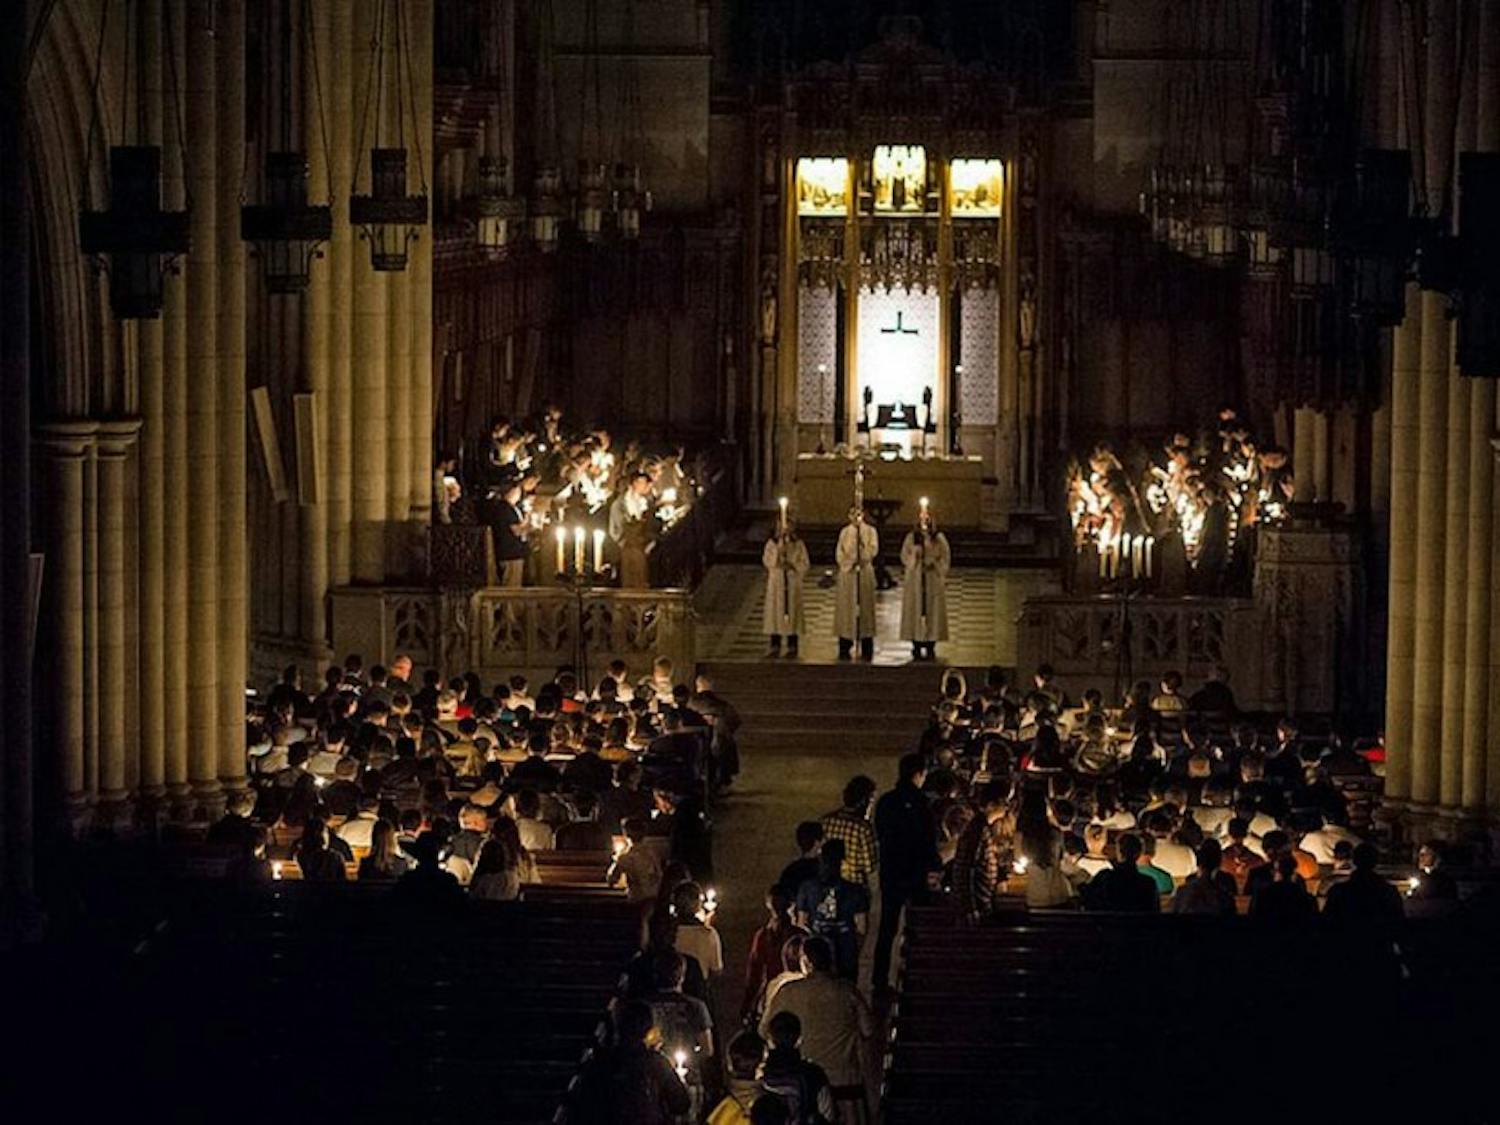 Worshipers at Duke Chapel participate in the All Hallows' Eve service, which takes place by candlelight Oct. 31.